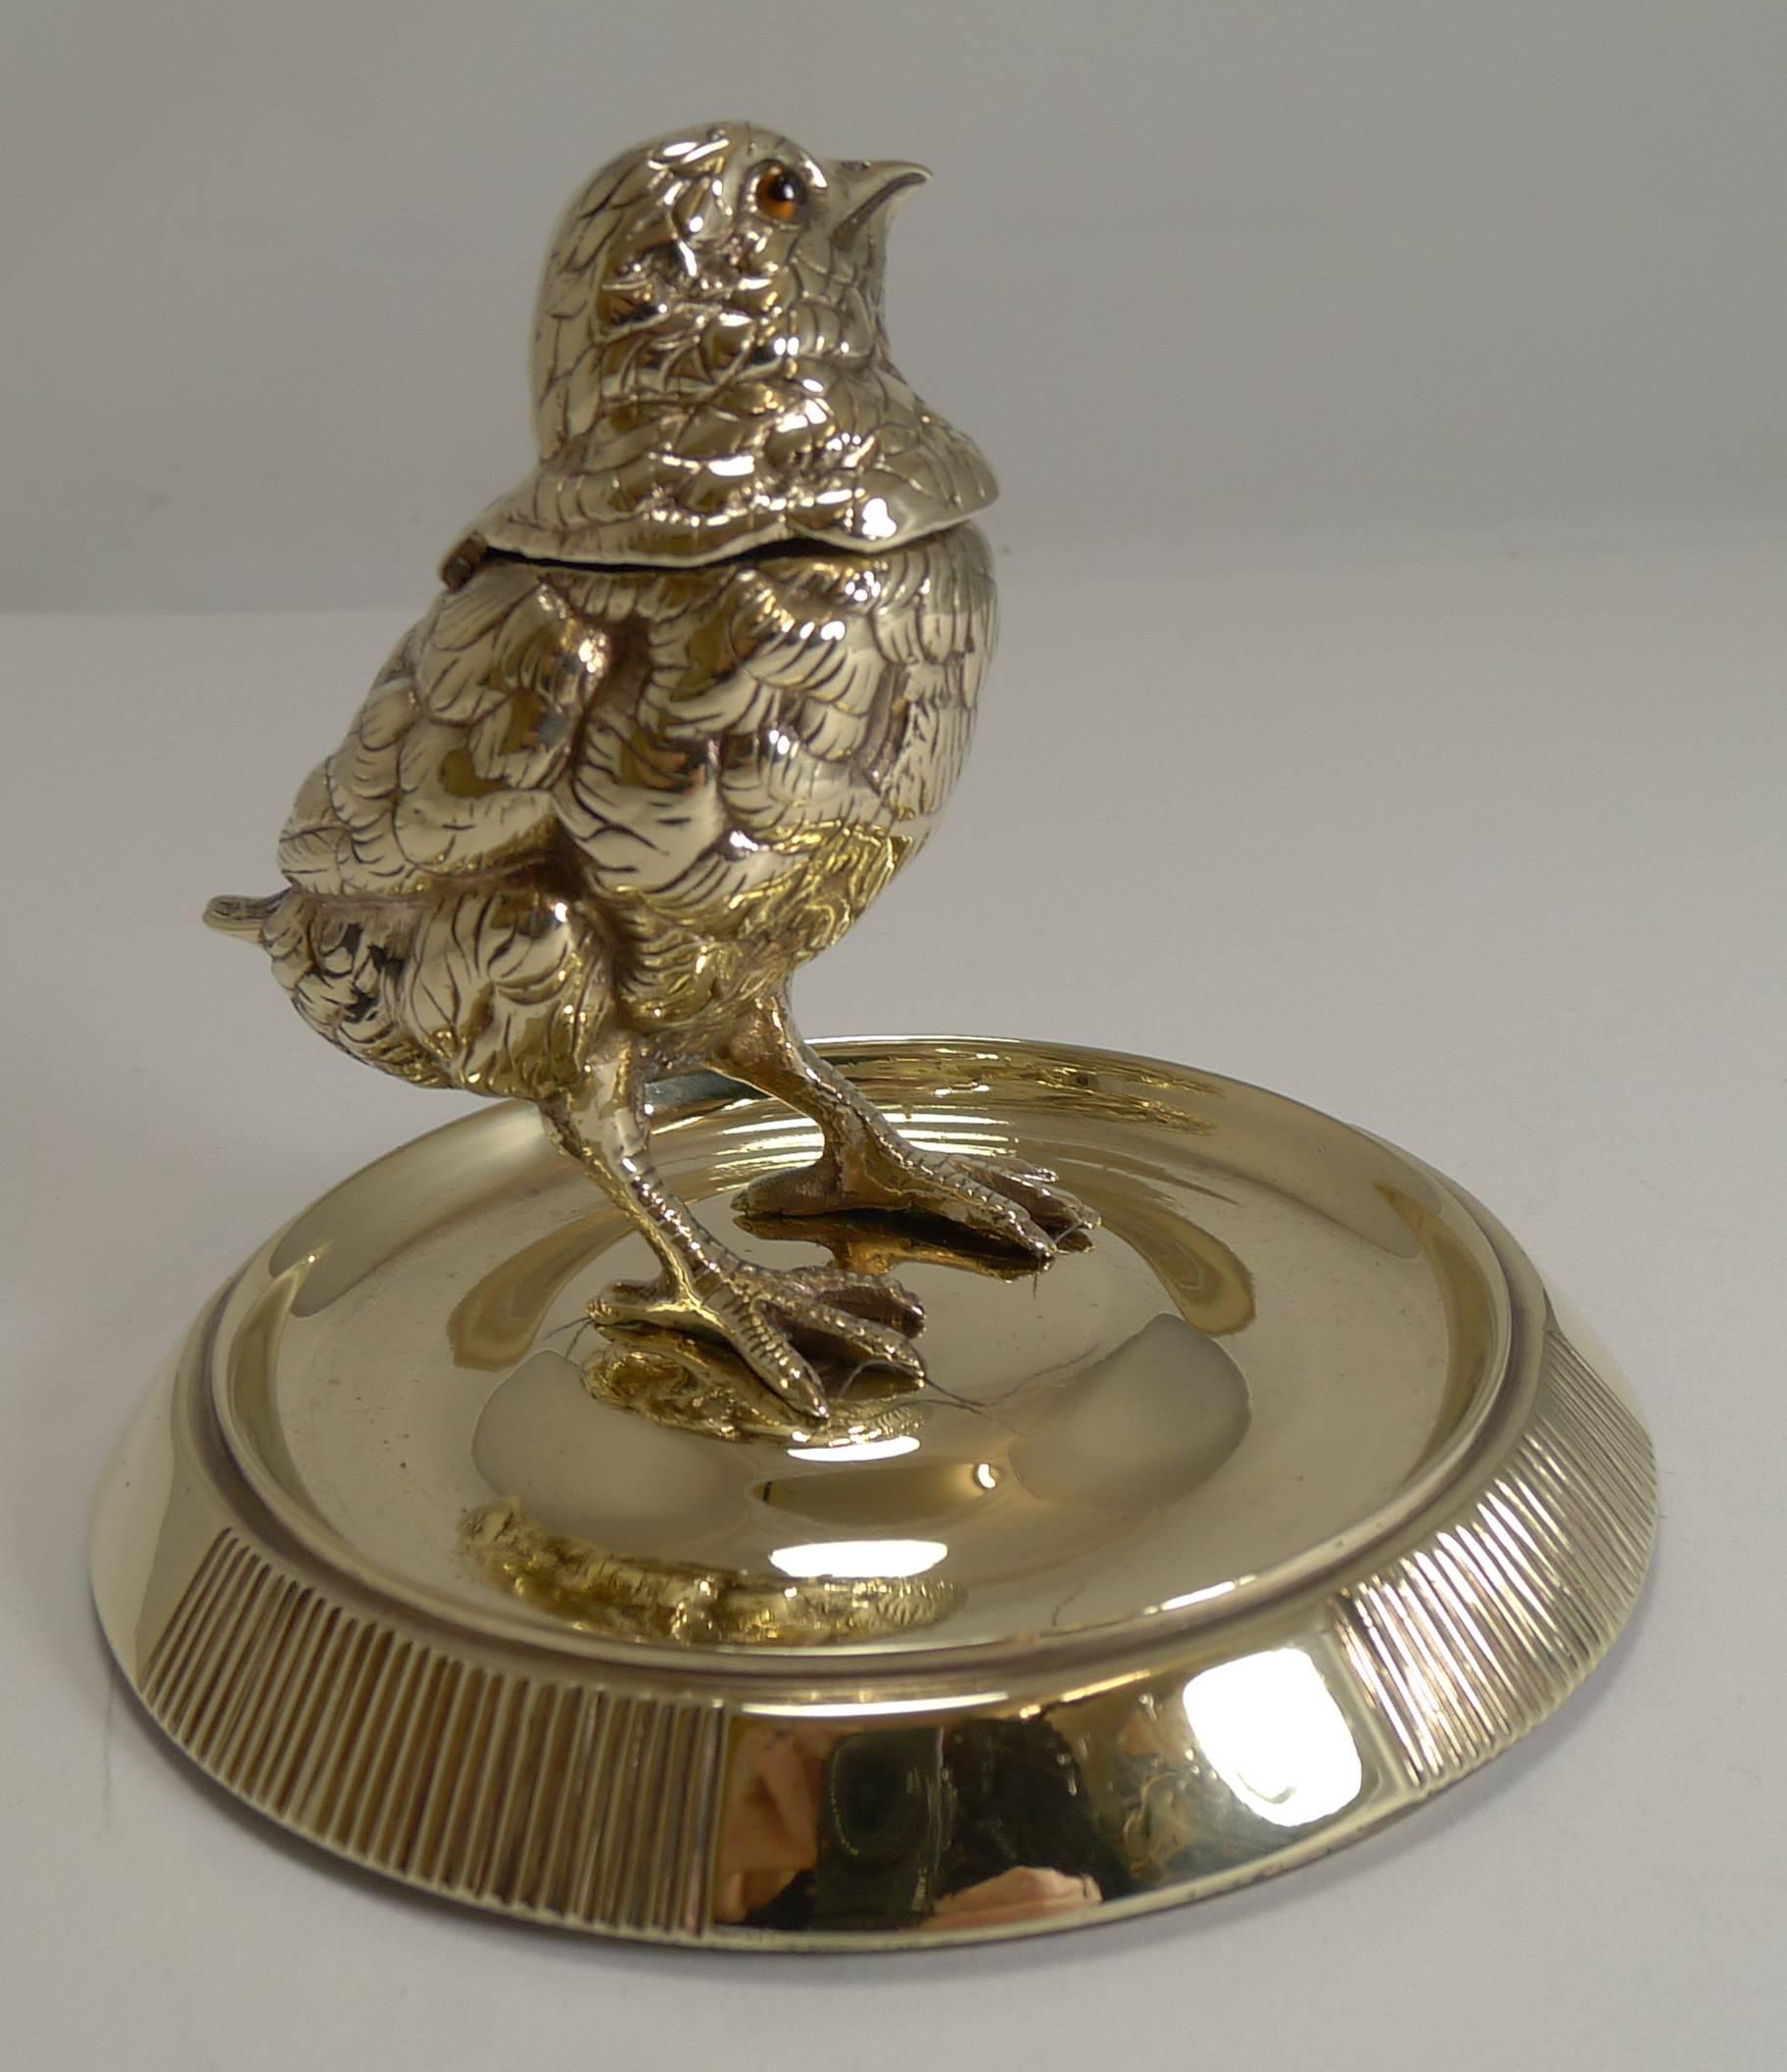 A truly adorable desk-top accessory, a combined inkwell and match striker.

Made from solid cast brass, the Chick is beautifully executed with lovely detail and retaining his two original glass eyes. The hinged head lifts to reveal a removable ink